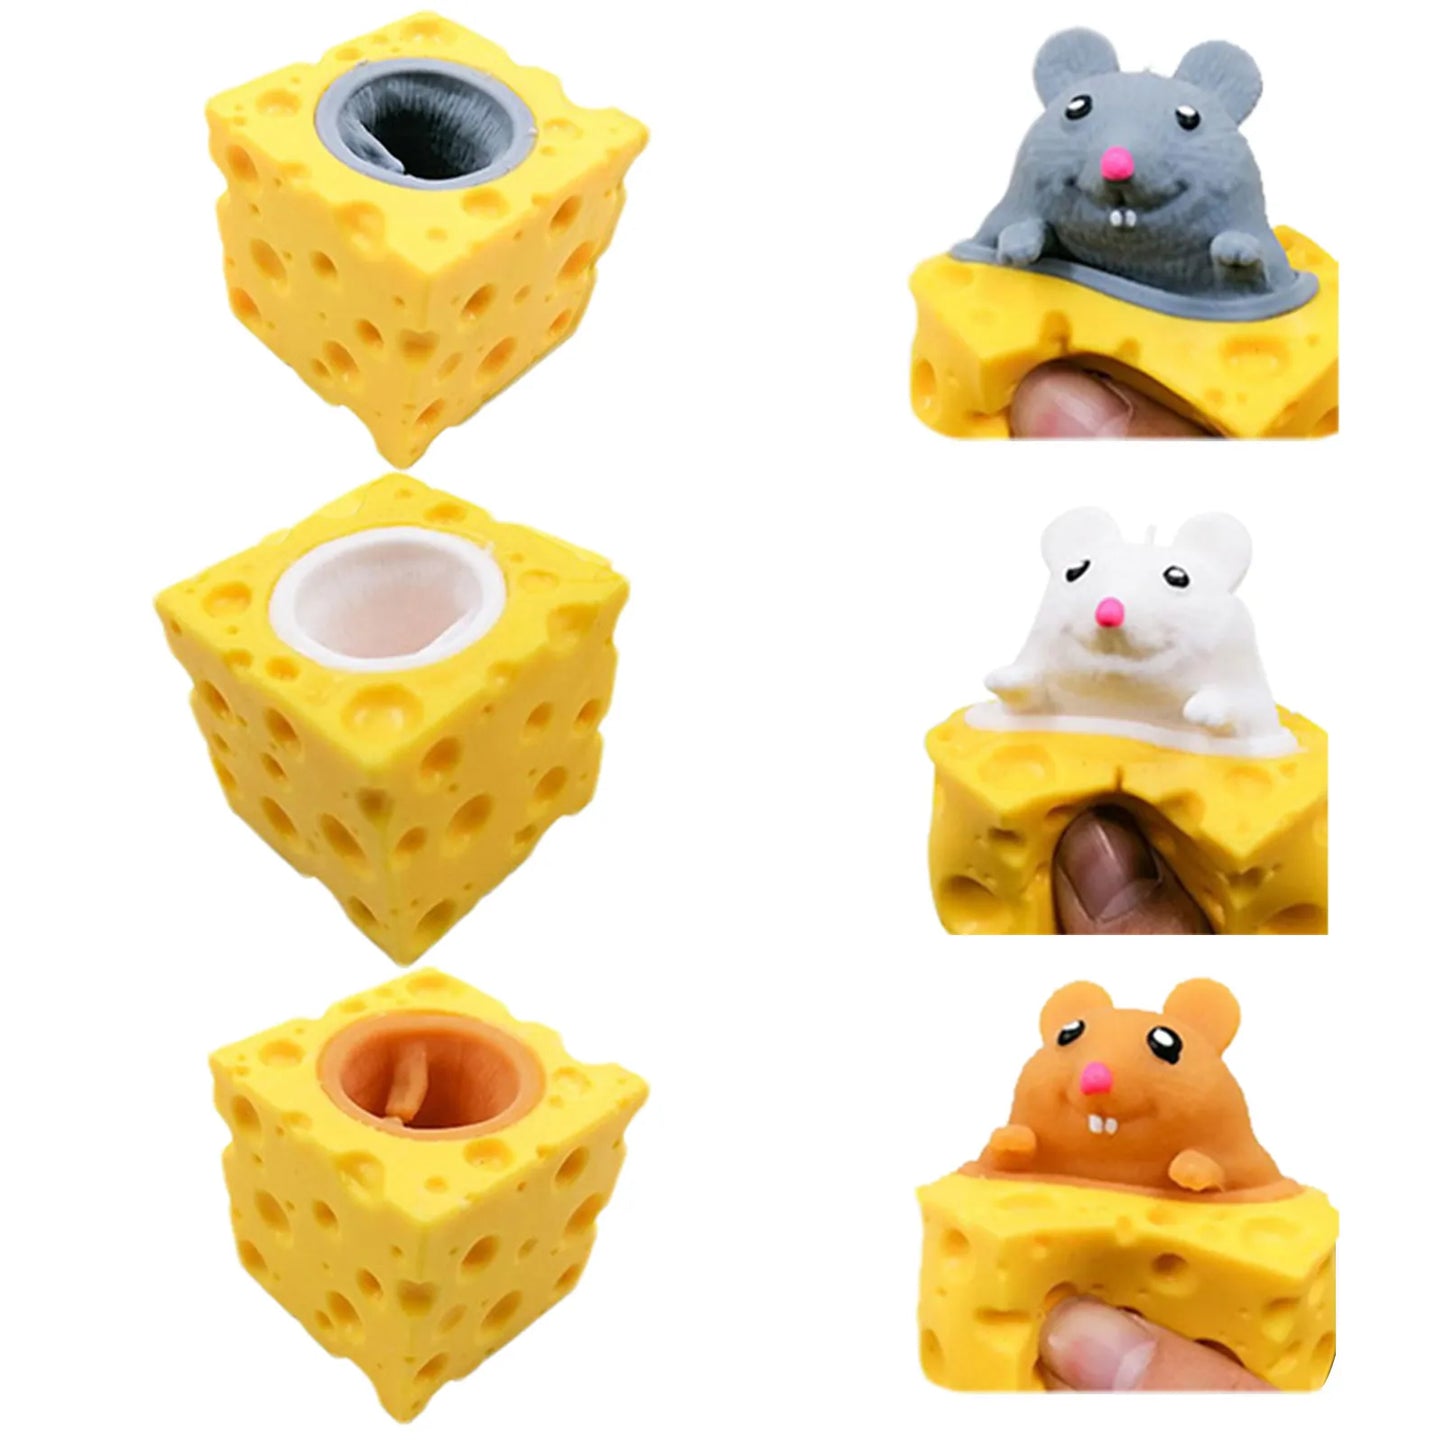 Pop Up Mice in Cheese